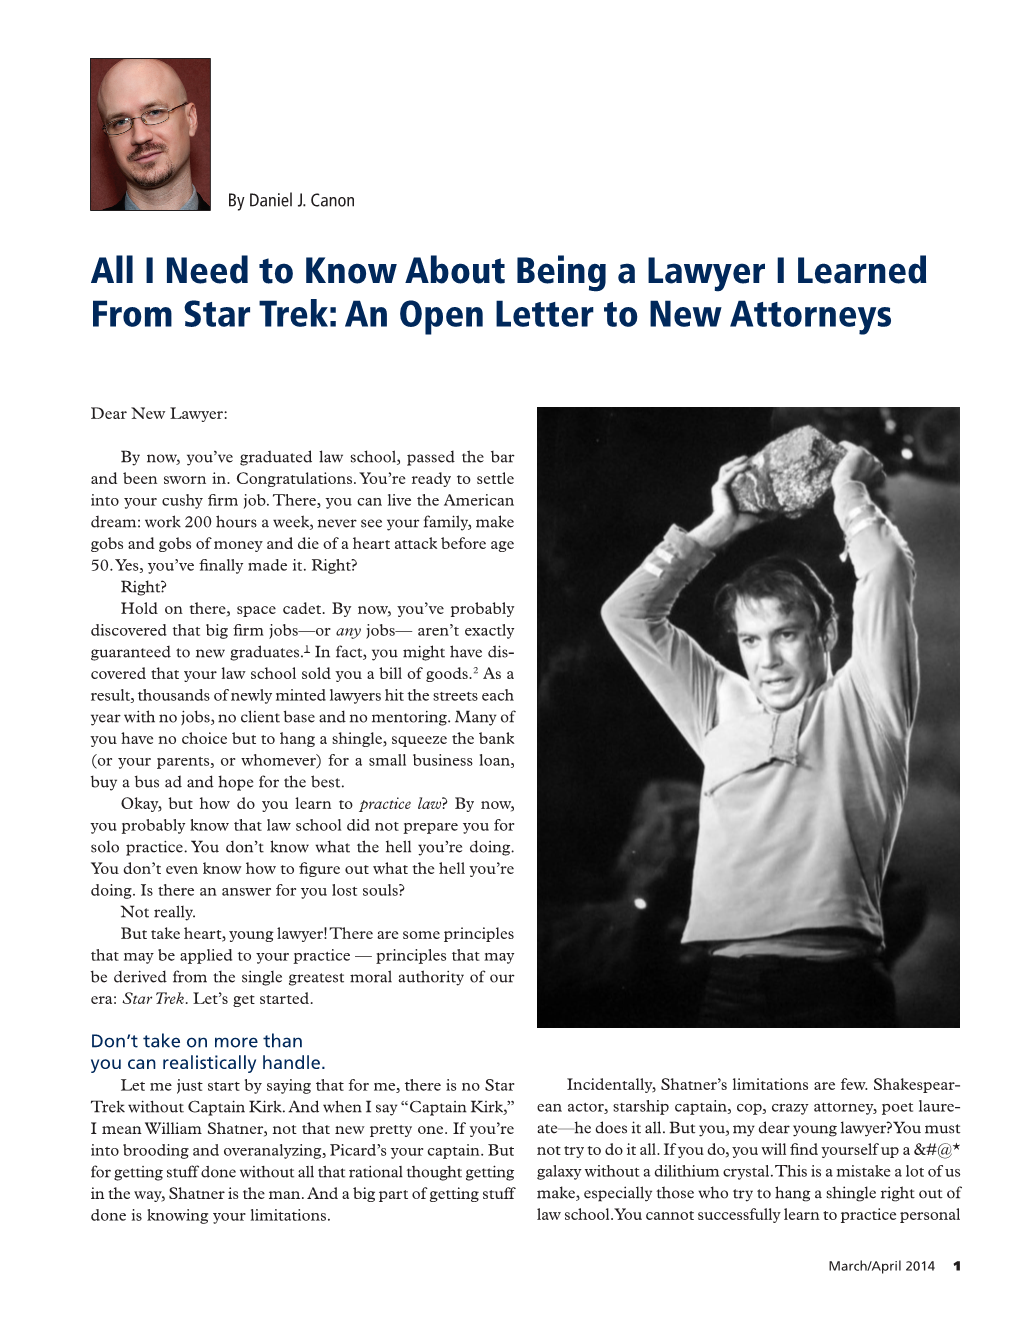 All I Need to Know About Being a Lawyer I Learned from Star Trek: an Open Letter to New Attorneys